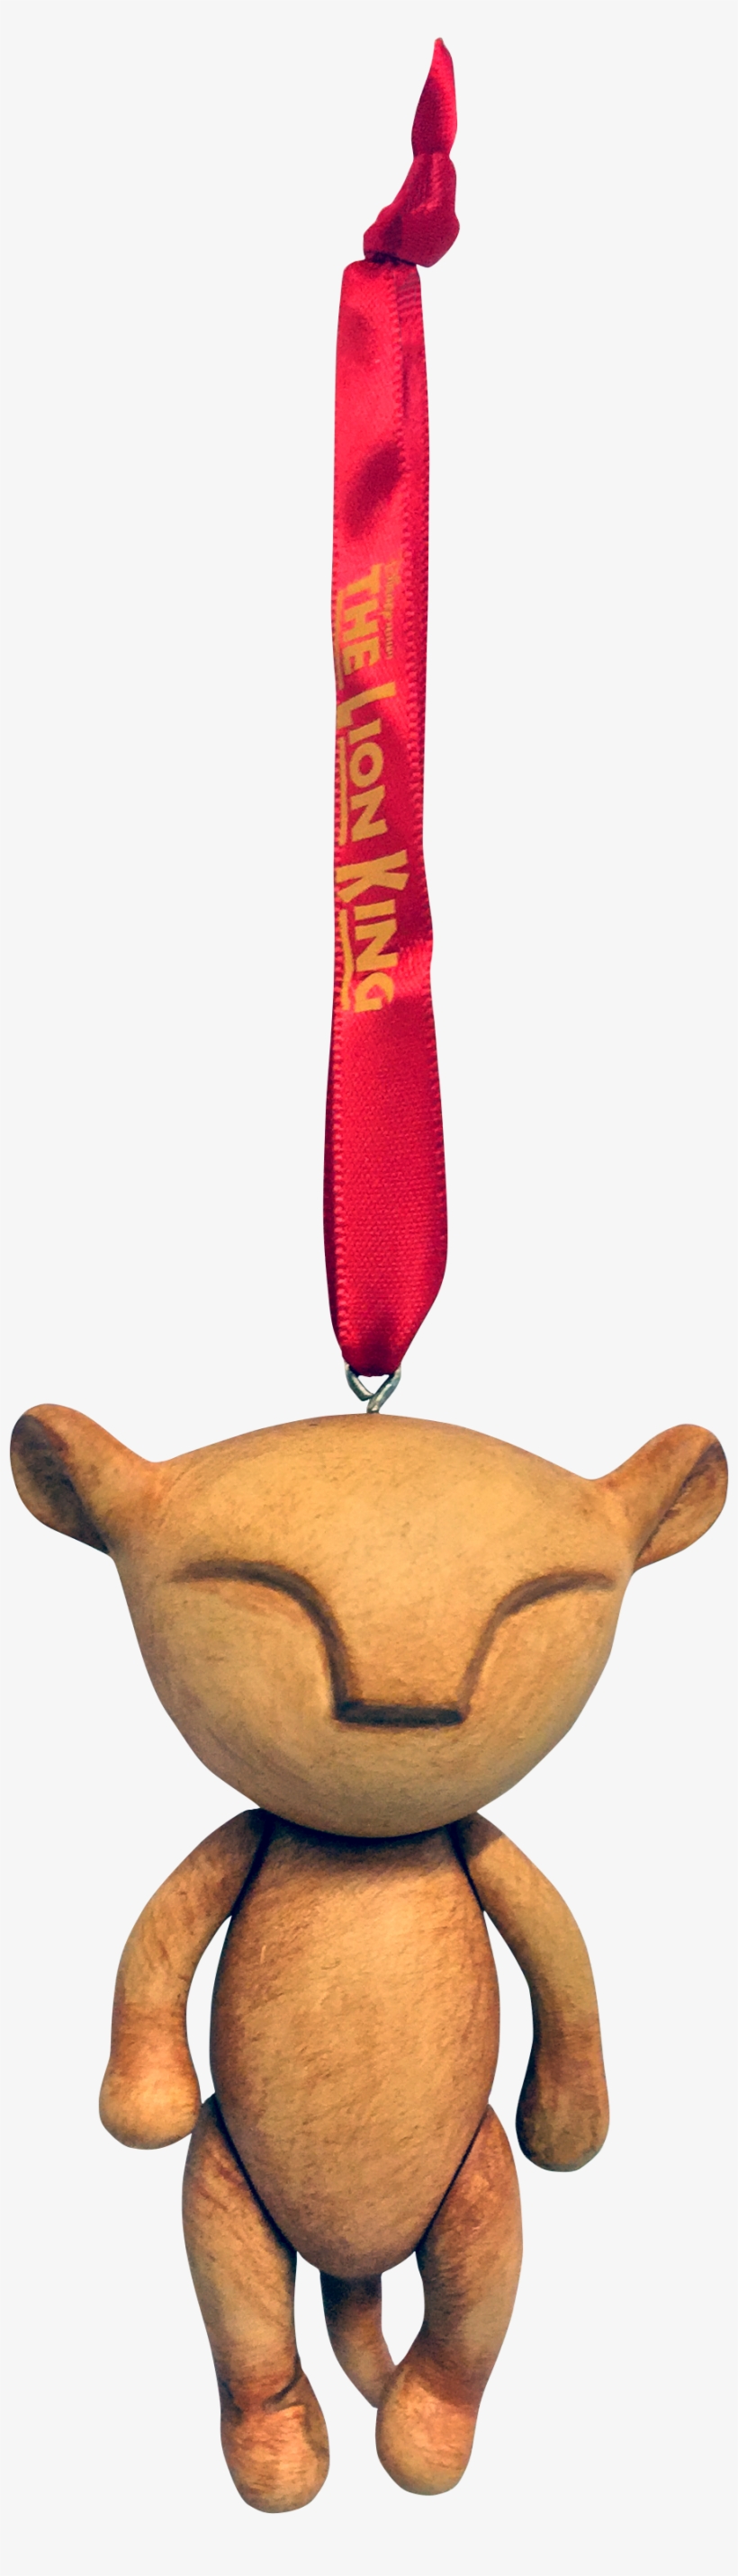 Lion King The Broadway Musical Baby Simba Ornament - The Lion King, transparent png #5010401